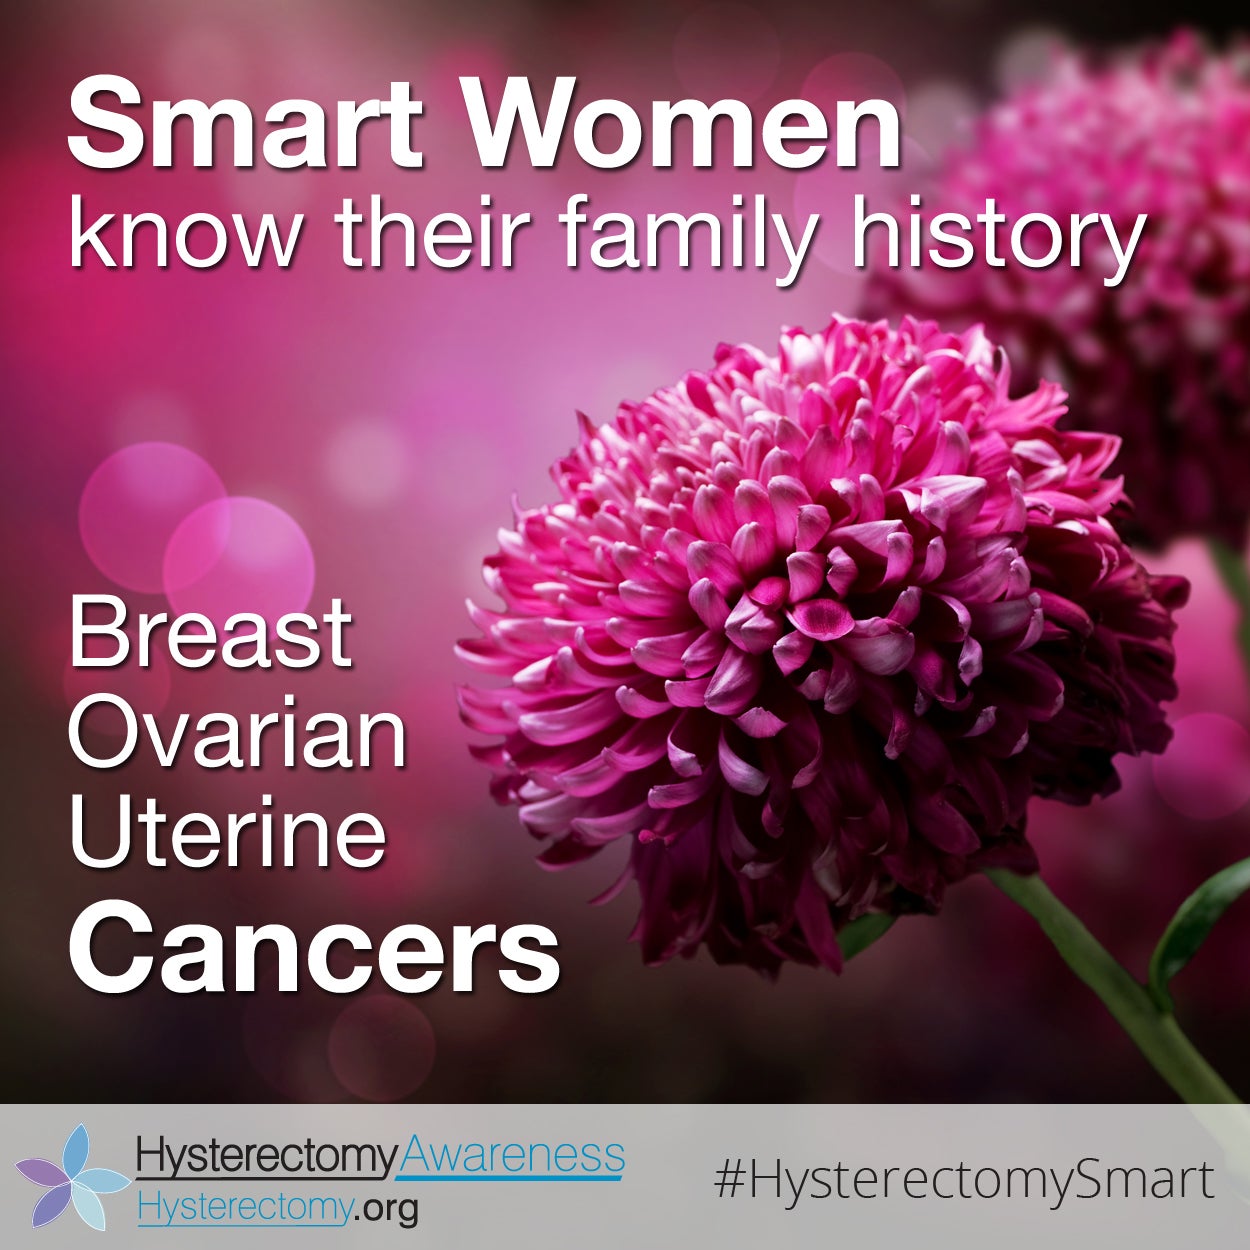 Smart women know their family history – breast, ovarian, uterine cancers #HysterectomySmart